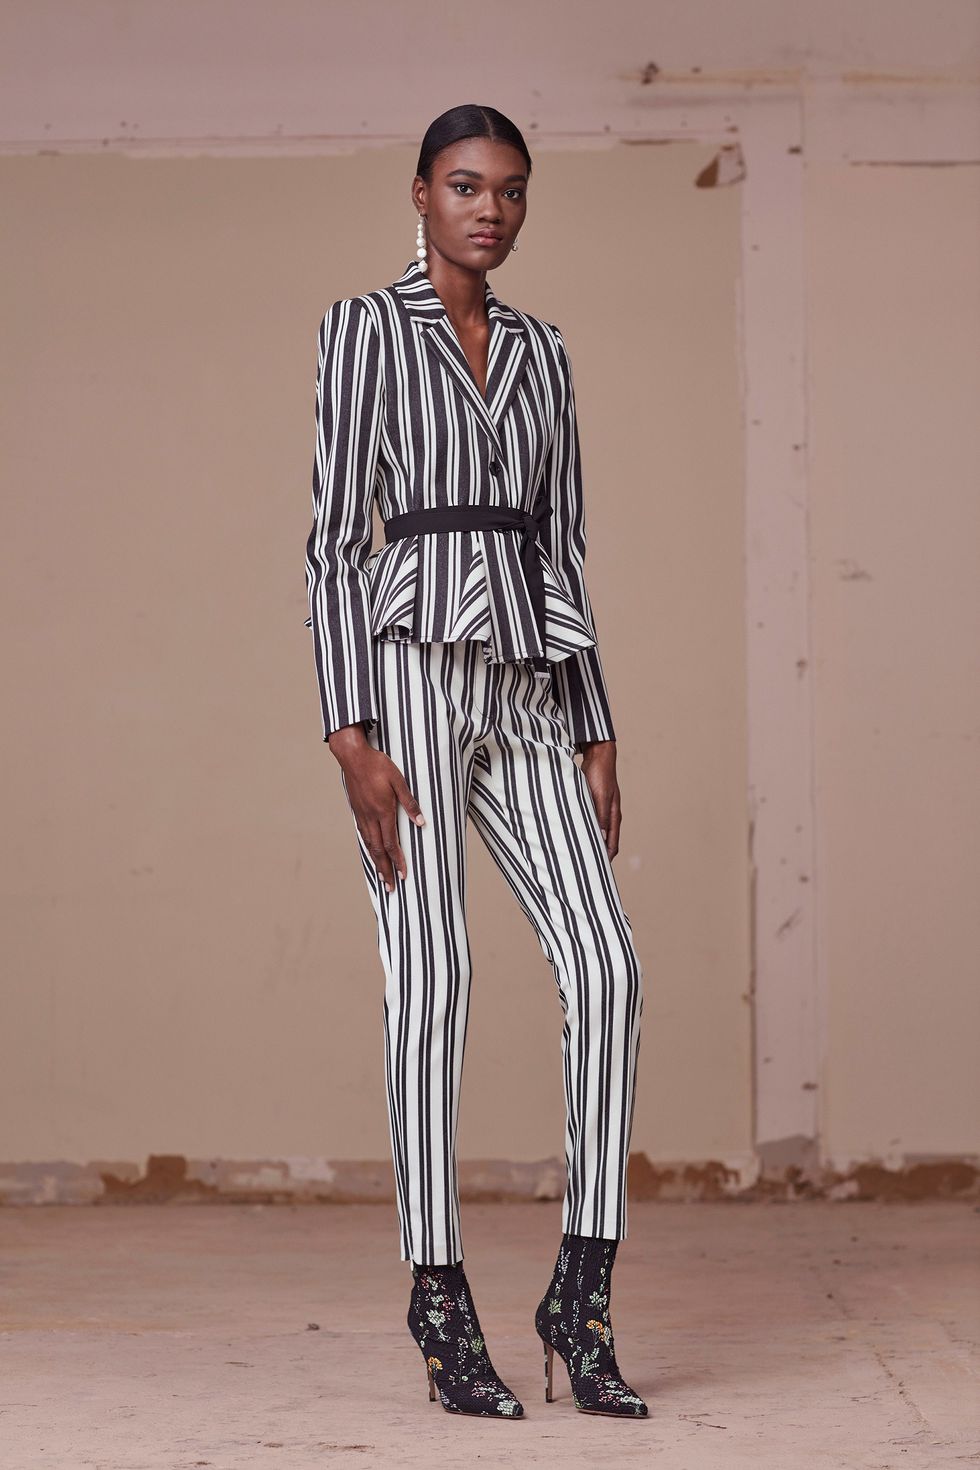 <p>While Spring gave us a rainbow selection of stripes, pre-fall is taking the idea back to its simpler origins for some high contrast cool.&nbsp;</p><p><em data-redactor-tag="em" data-verified="redactor">Pictured: Altuzarra</em></p>